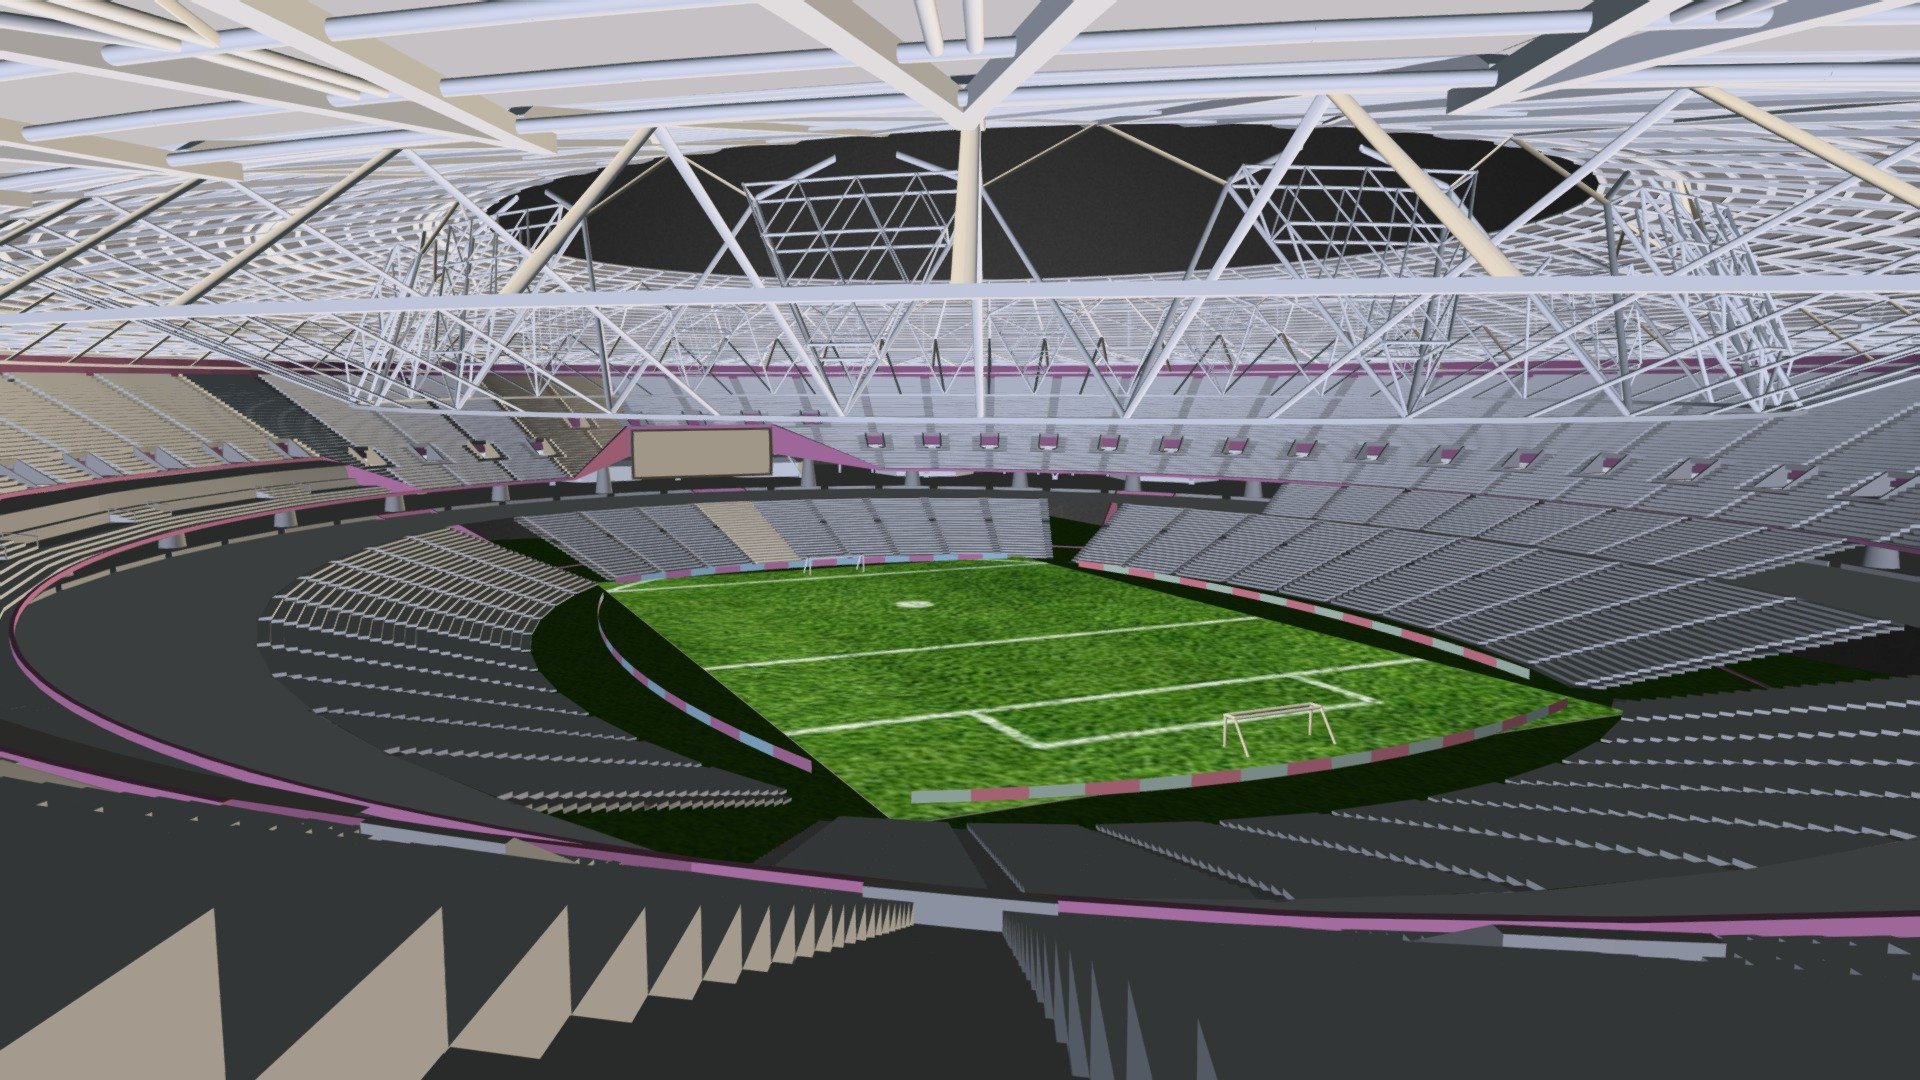 3D model of the Olympic Stadium in Stratford, London, UK. Soon to be the home of West Ham Football Club and UK Athletics. The Model shows what the structure will look like when the redevelopments of the Stadium have concluded in 2016. Model was created to be accurate as I could get it. This version of the Model shows the Stadium in Football Mode with the retractable seating and the screens installed 3d model